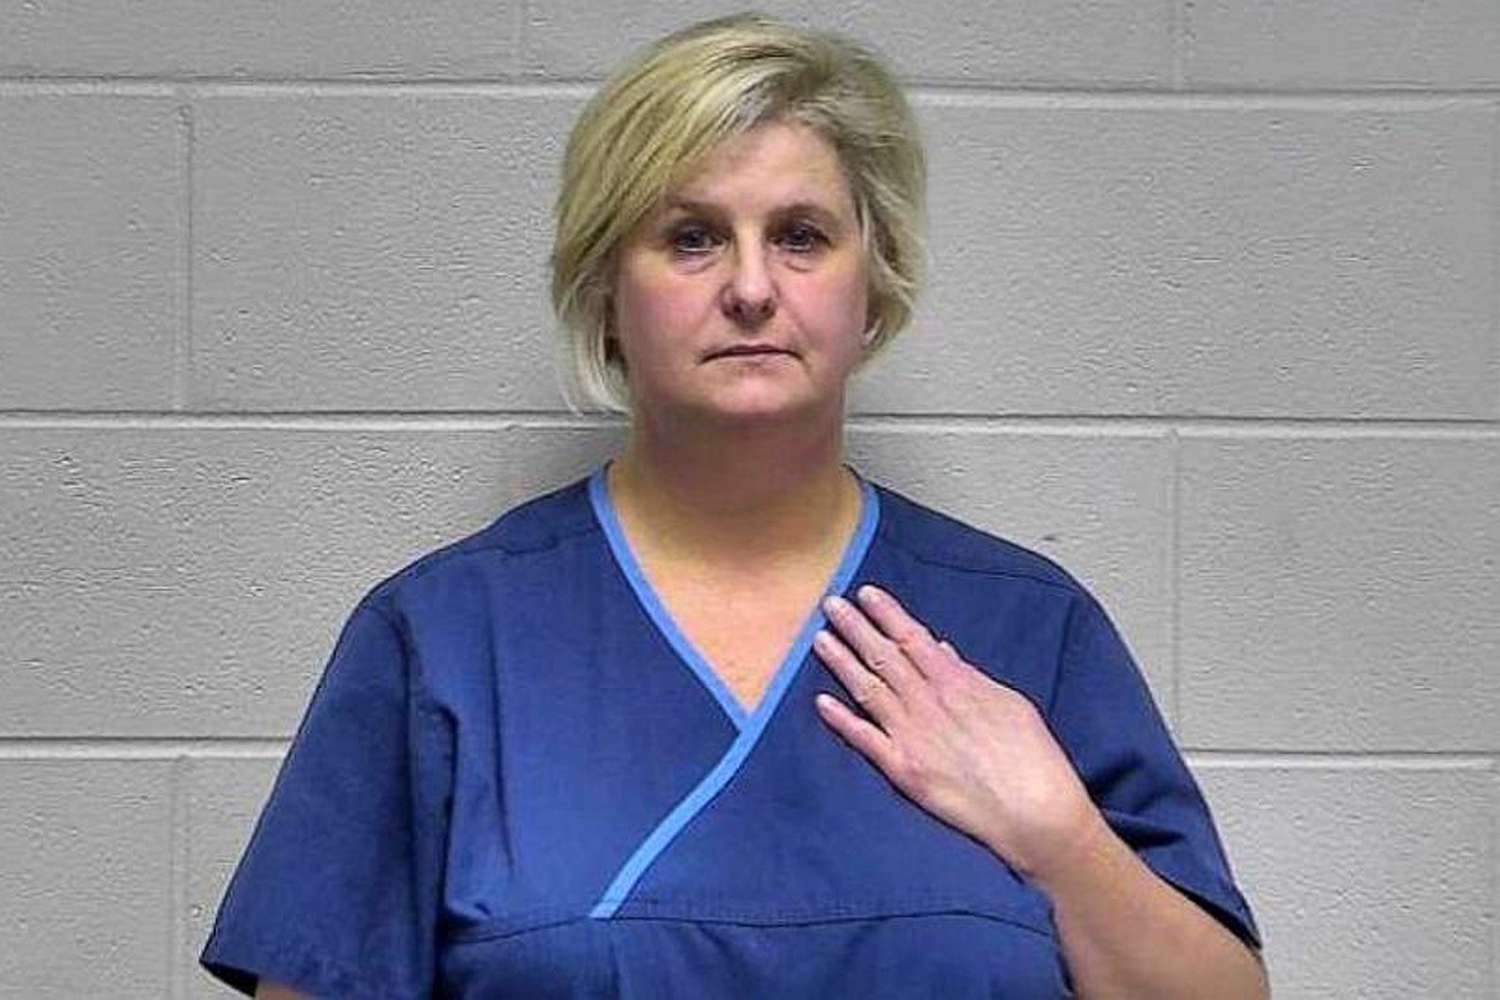 Stephanie M. Russell, 53,Â pleaded guilty Monday, April 22 to attempting to hire a hitman to kill her ex-husband